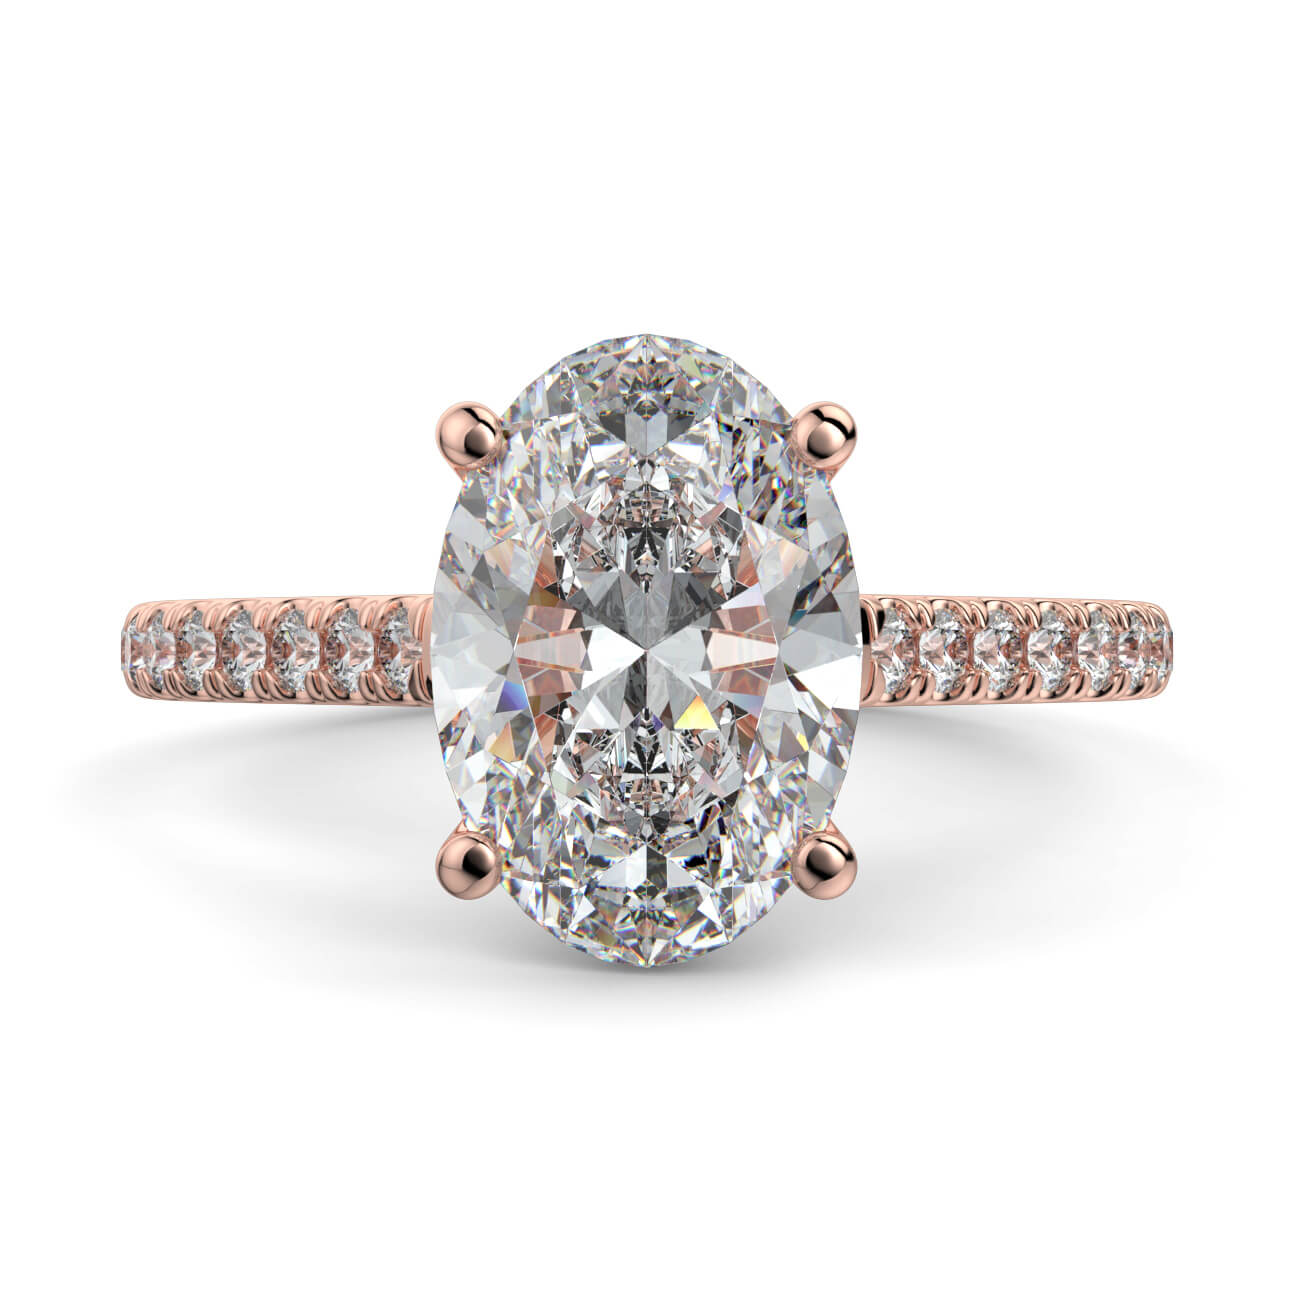 Oval shape diamond cathedral engagement ring in rose gold – Australian Diamond Network